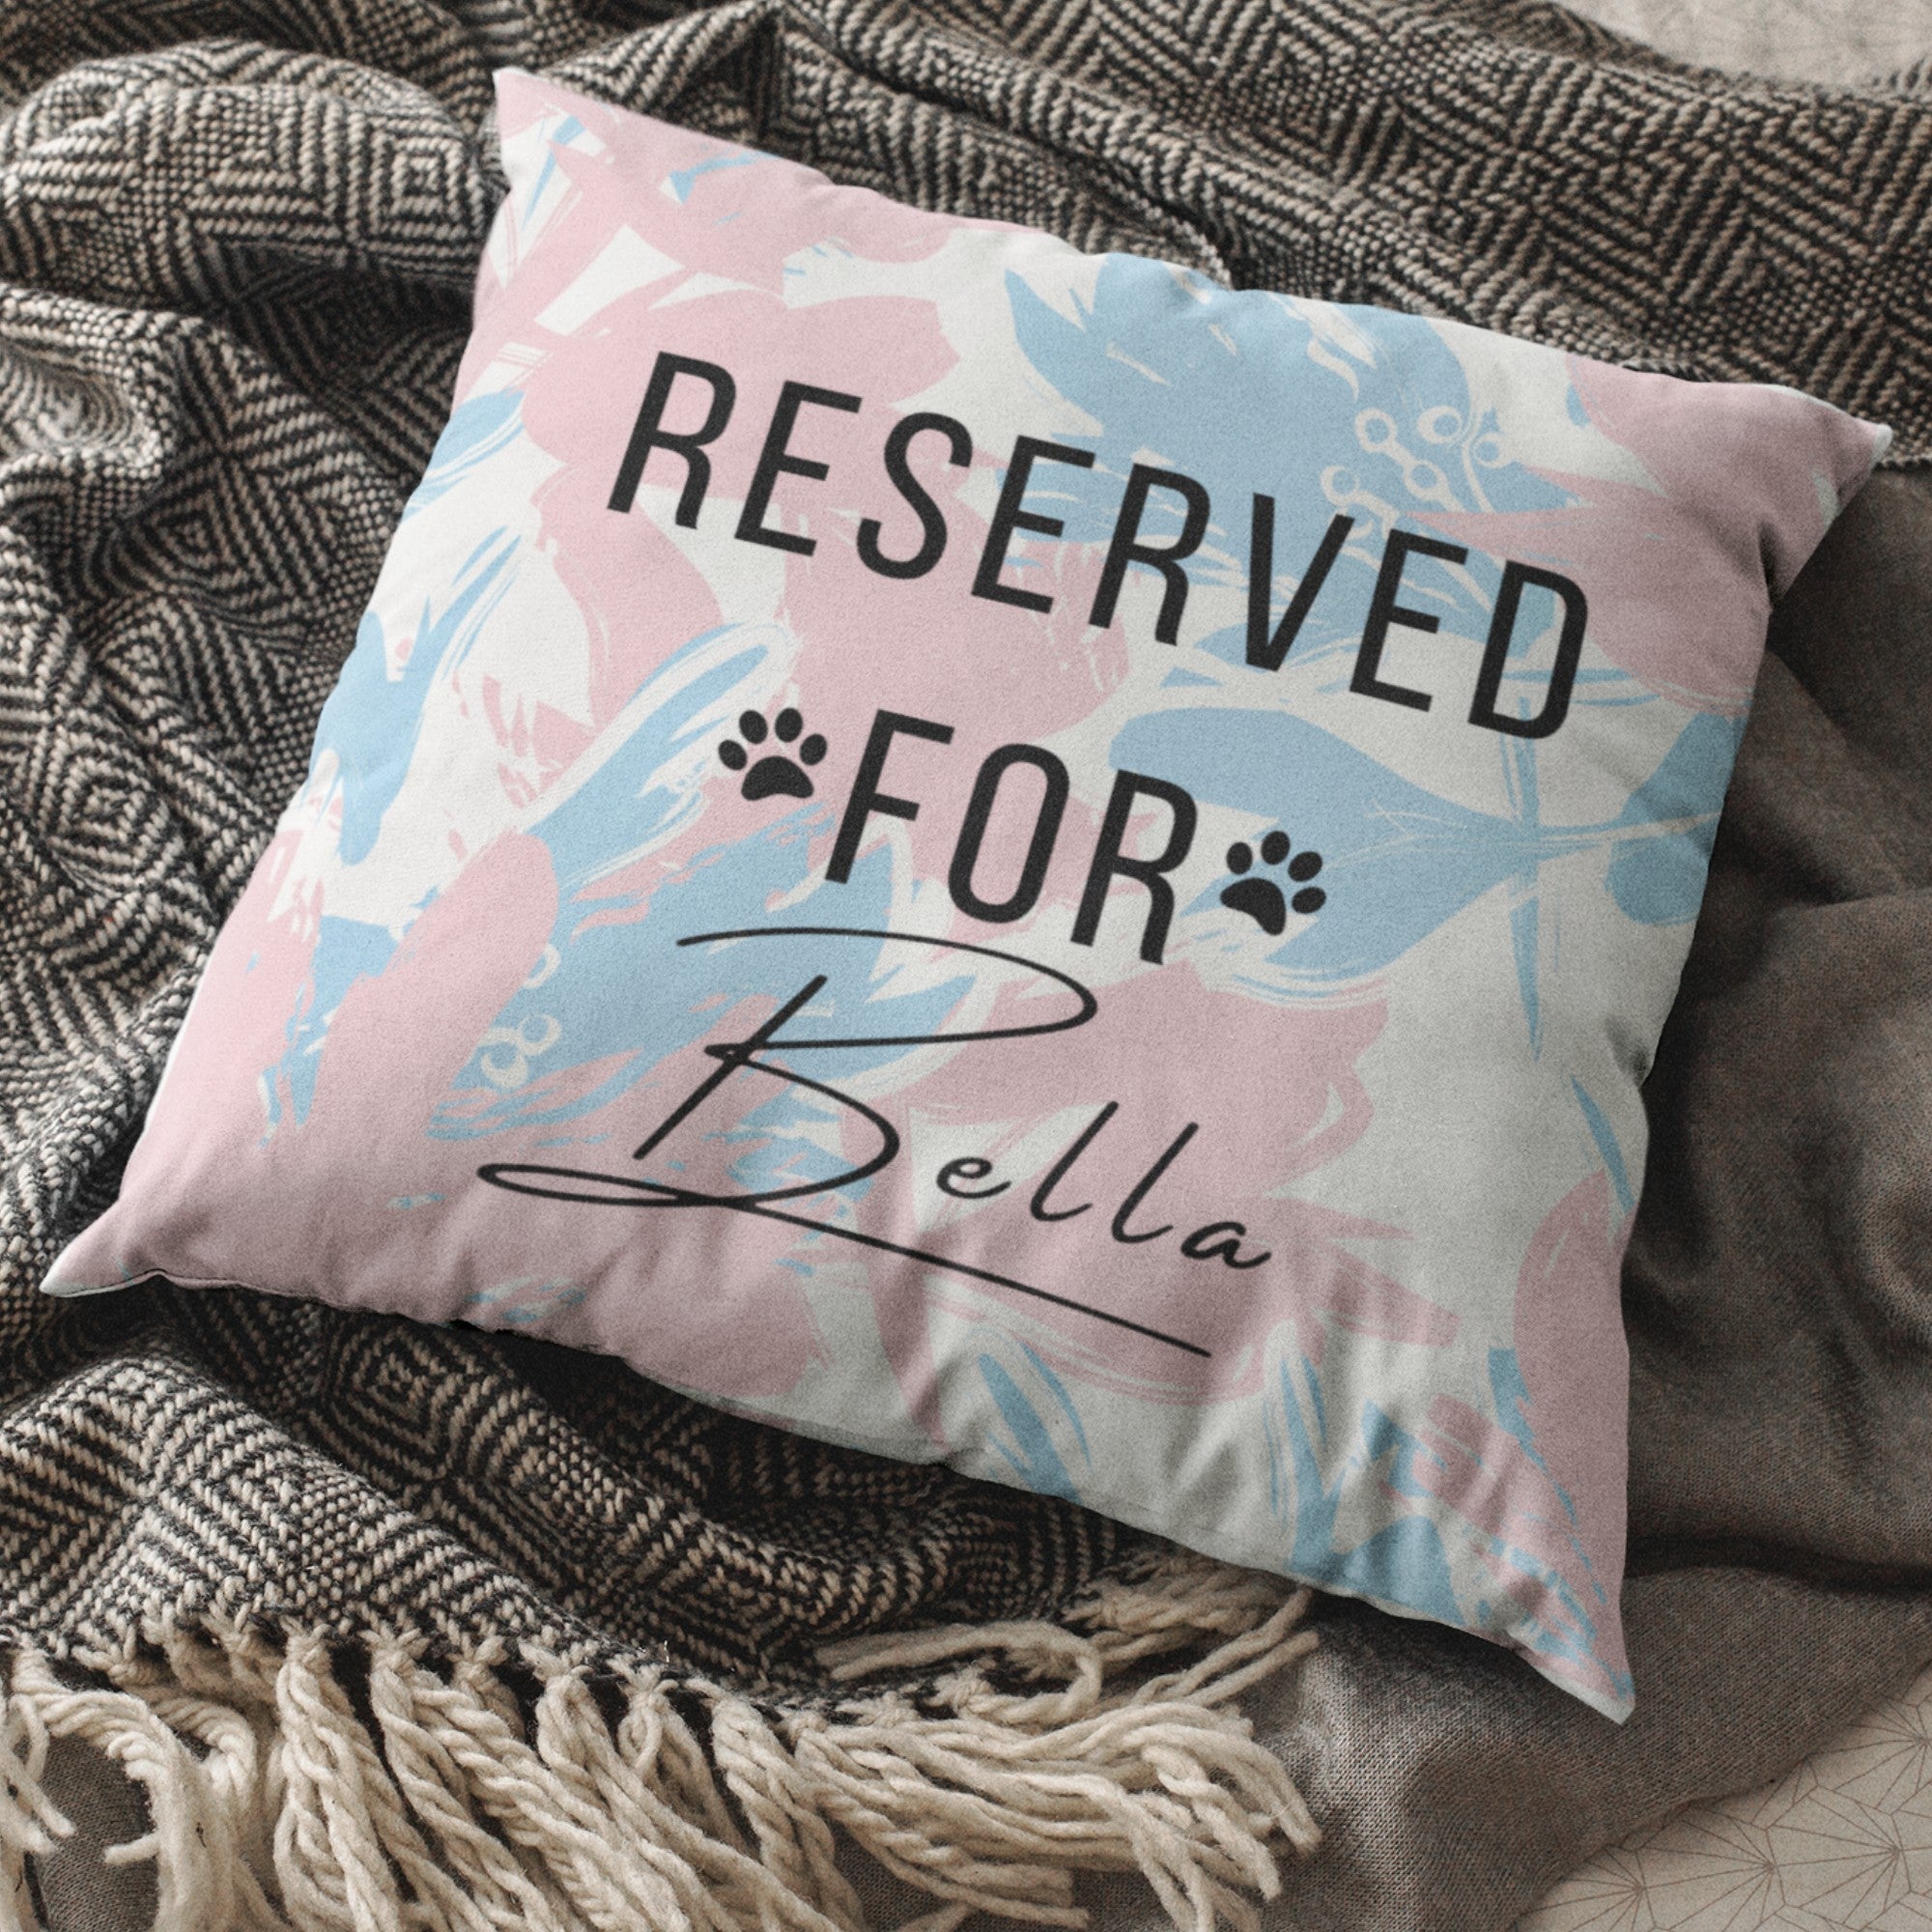 Personalised Decorative Floral Cushion - Sweetie